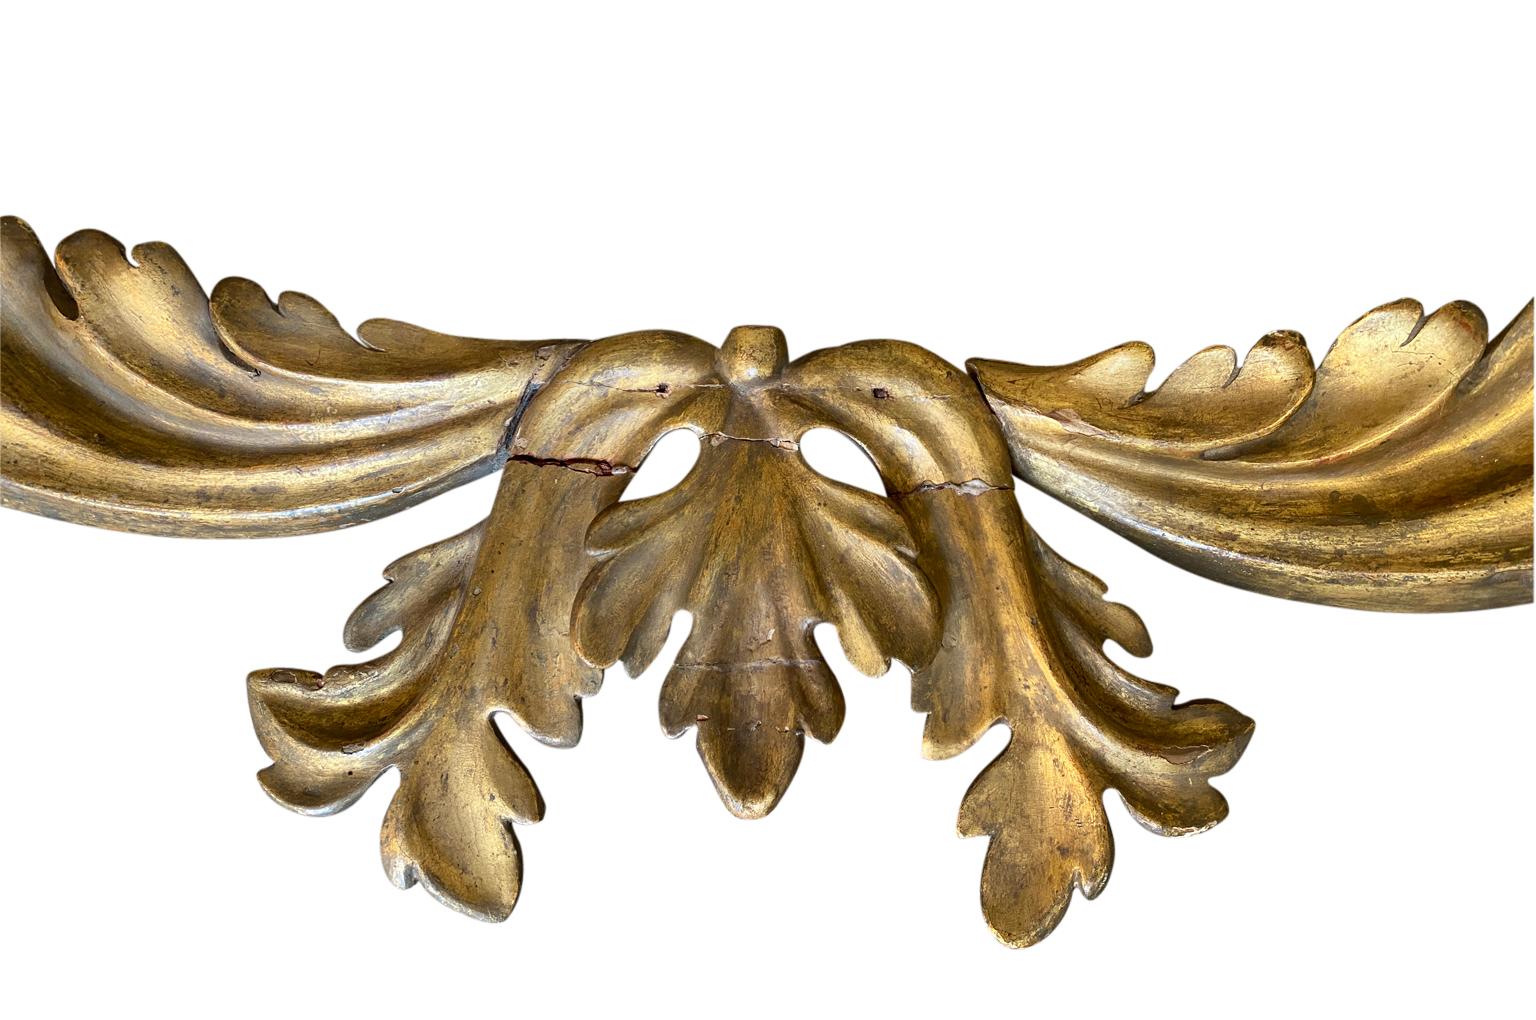 A very lovely 18th century giltwood pediment from Venice, Italy. Wonderful patina. Beautiful used as a window treatment or incorporated into a headboard.